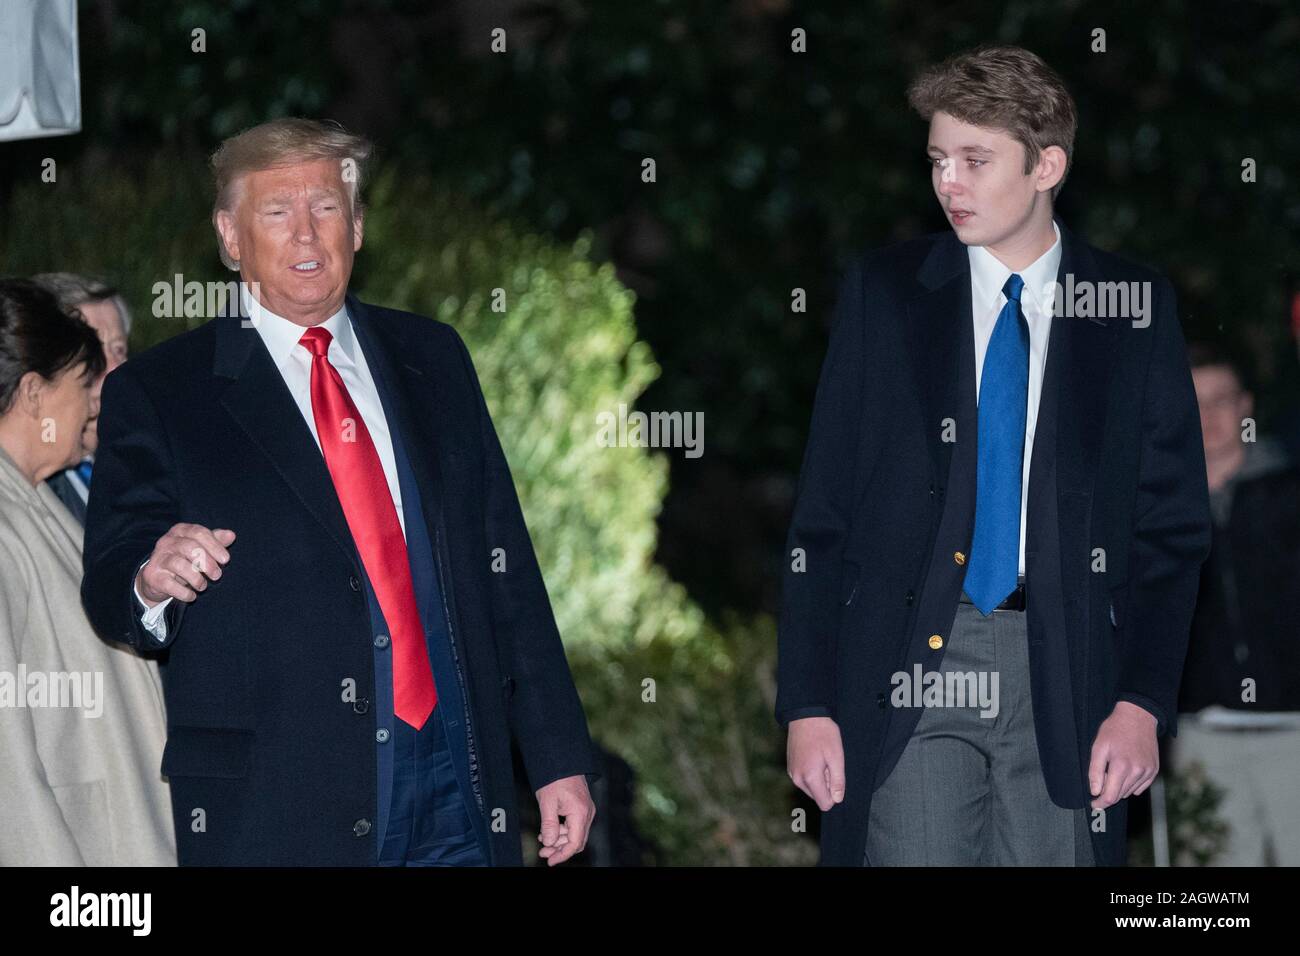 United States President Donald J. Trump and his son Barron Trump depart the White House in Washington, DC for the signing ceremony for S.1790, the National Defense Authorization Act for Fiscal Year 2020 and then on to Florida for their holidays on Friday, December 20, 2019.Credit: Chris Kleponis/Pool via CNP /MediaPunch Stock Photo